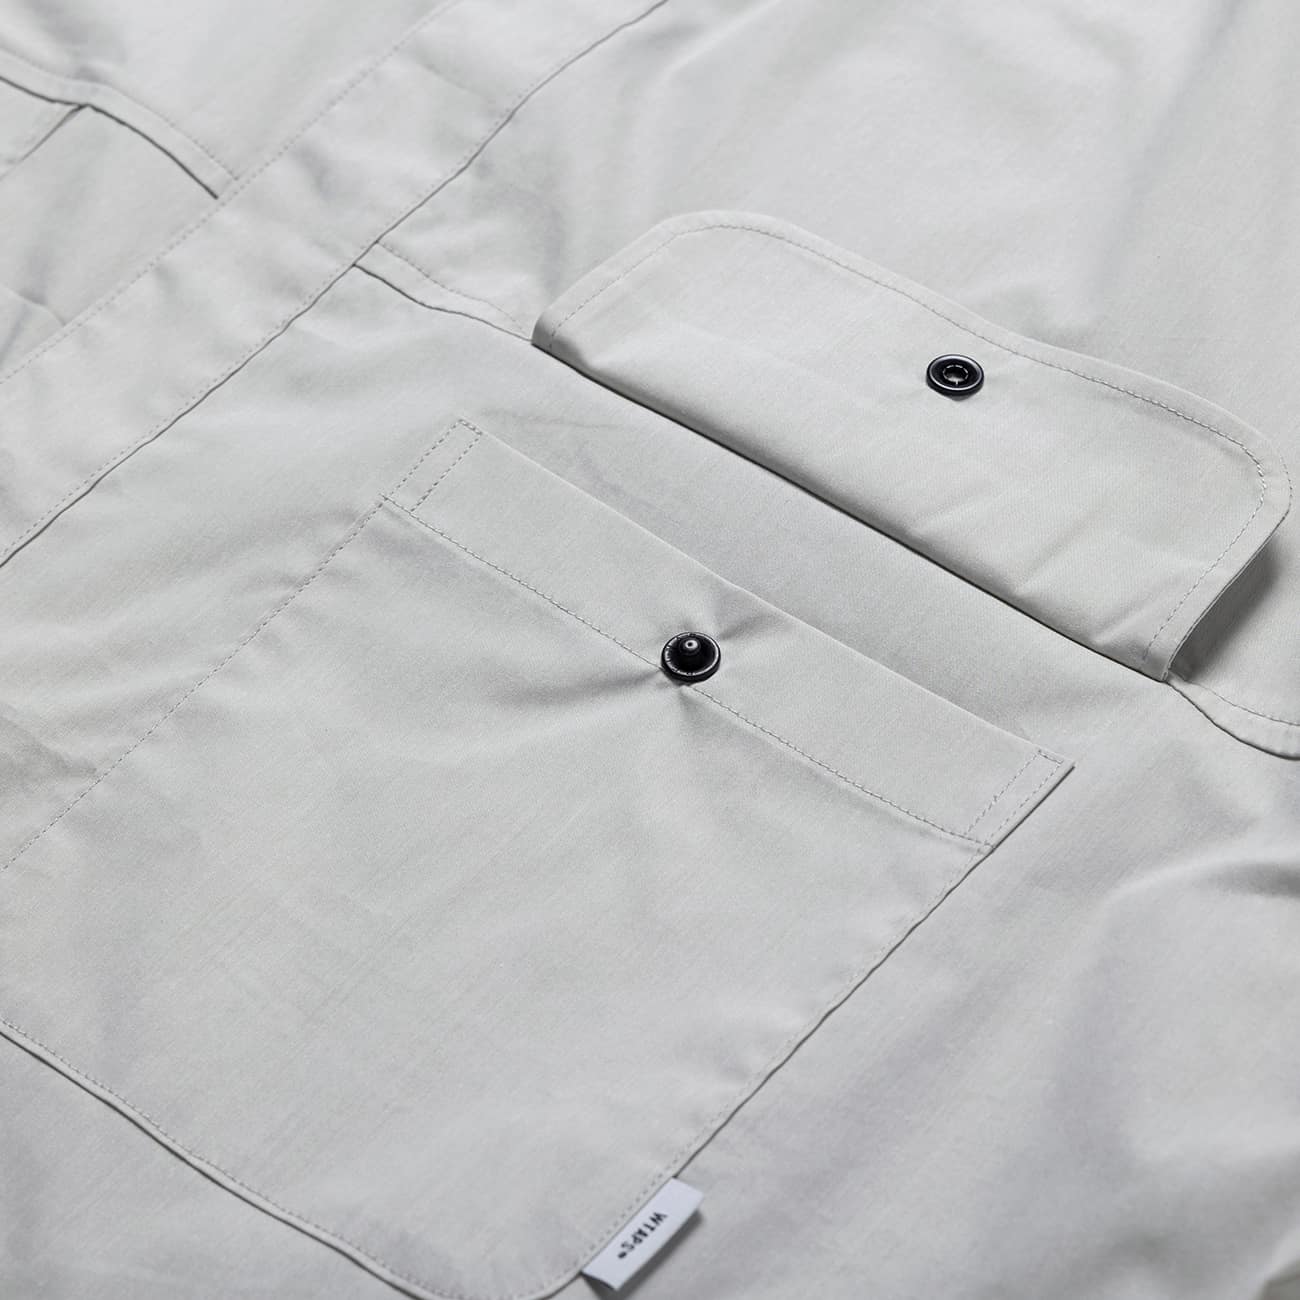 wtaps LADDER / SS / COPO. BROADCLOTH.